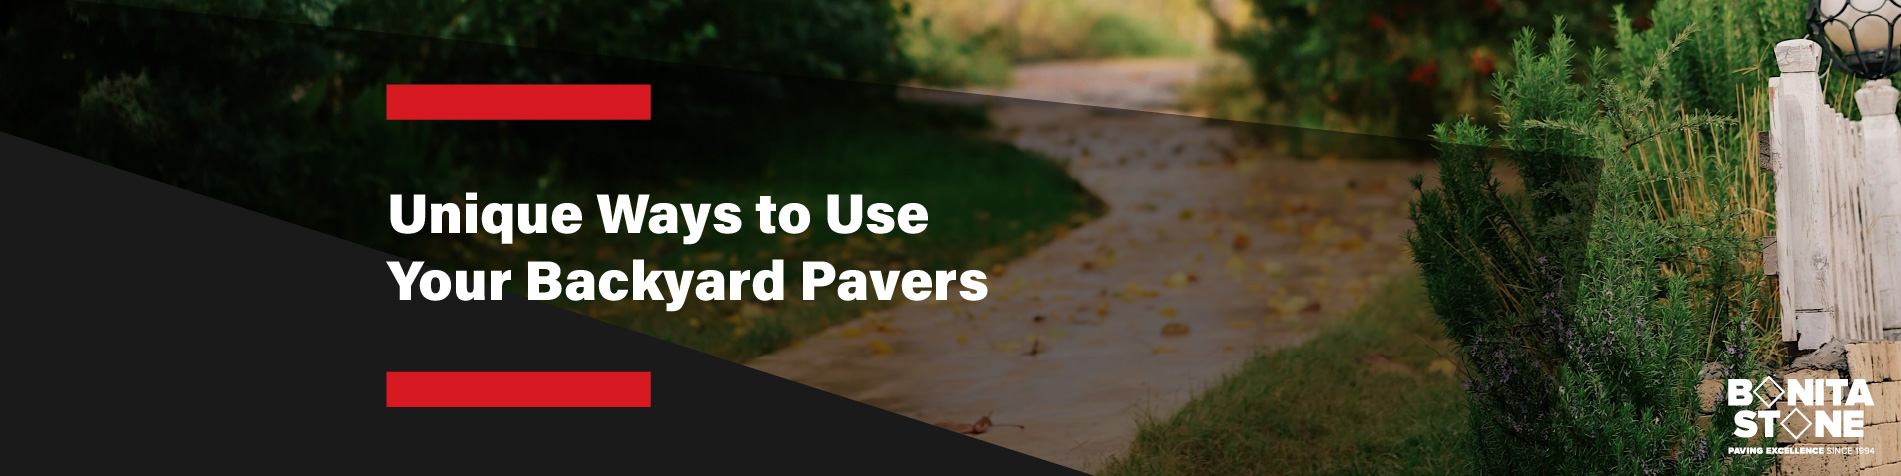 unique-ways-to-use-your-backyard-pavers-banner